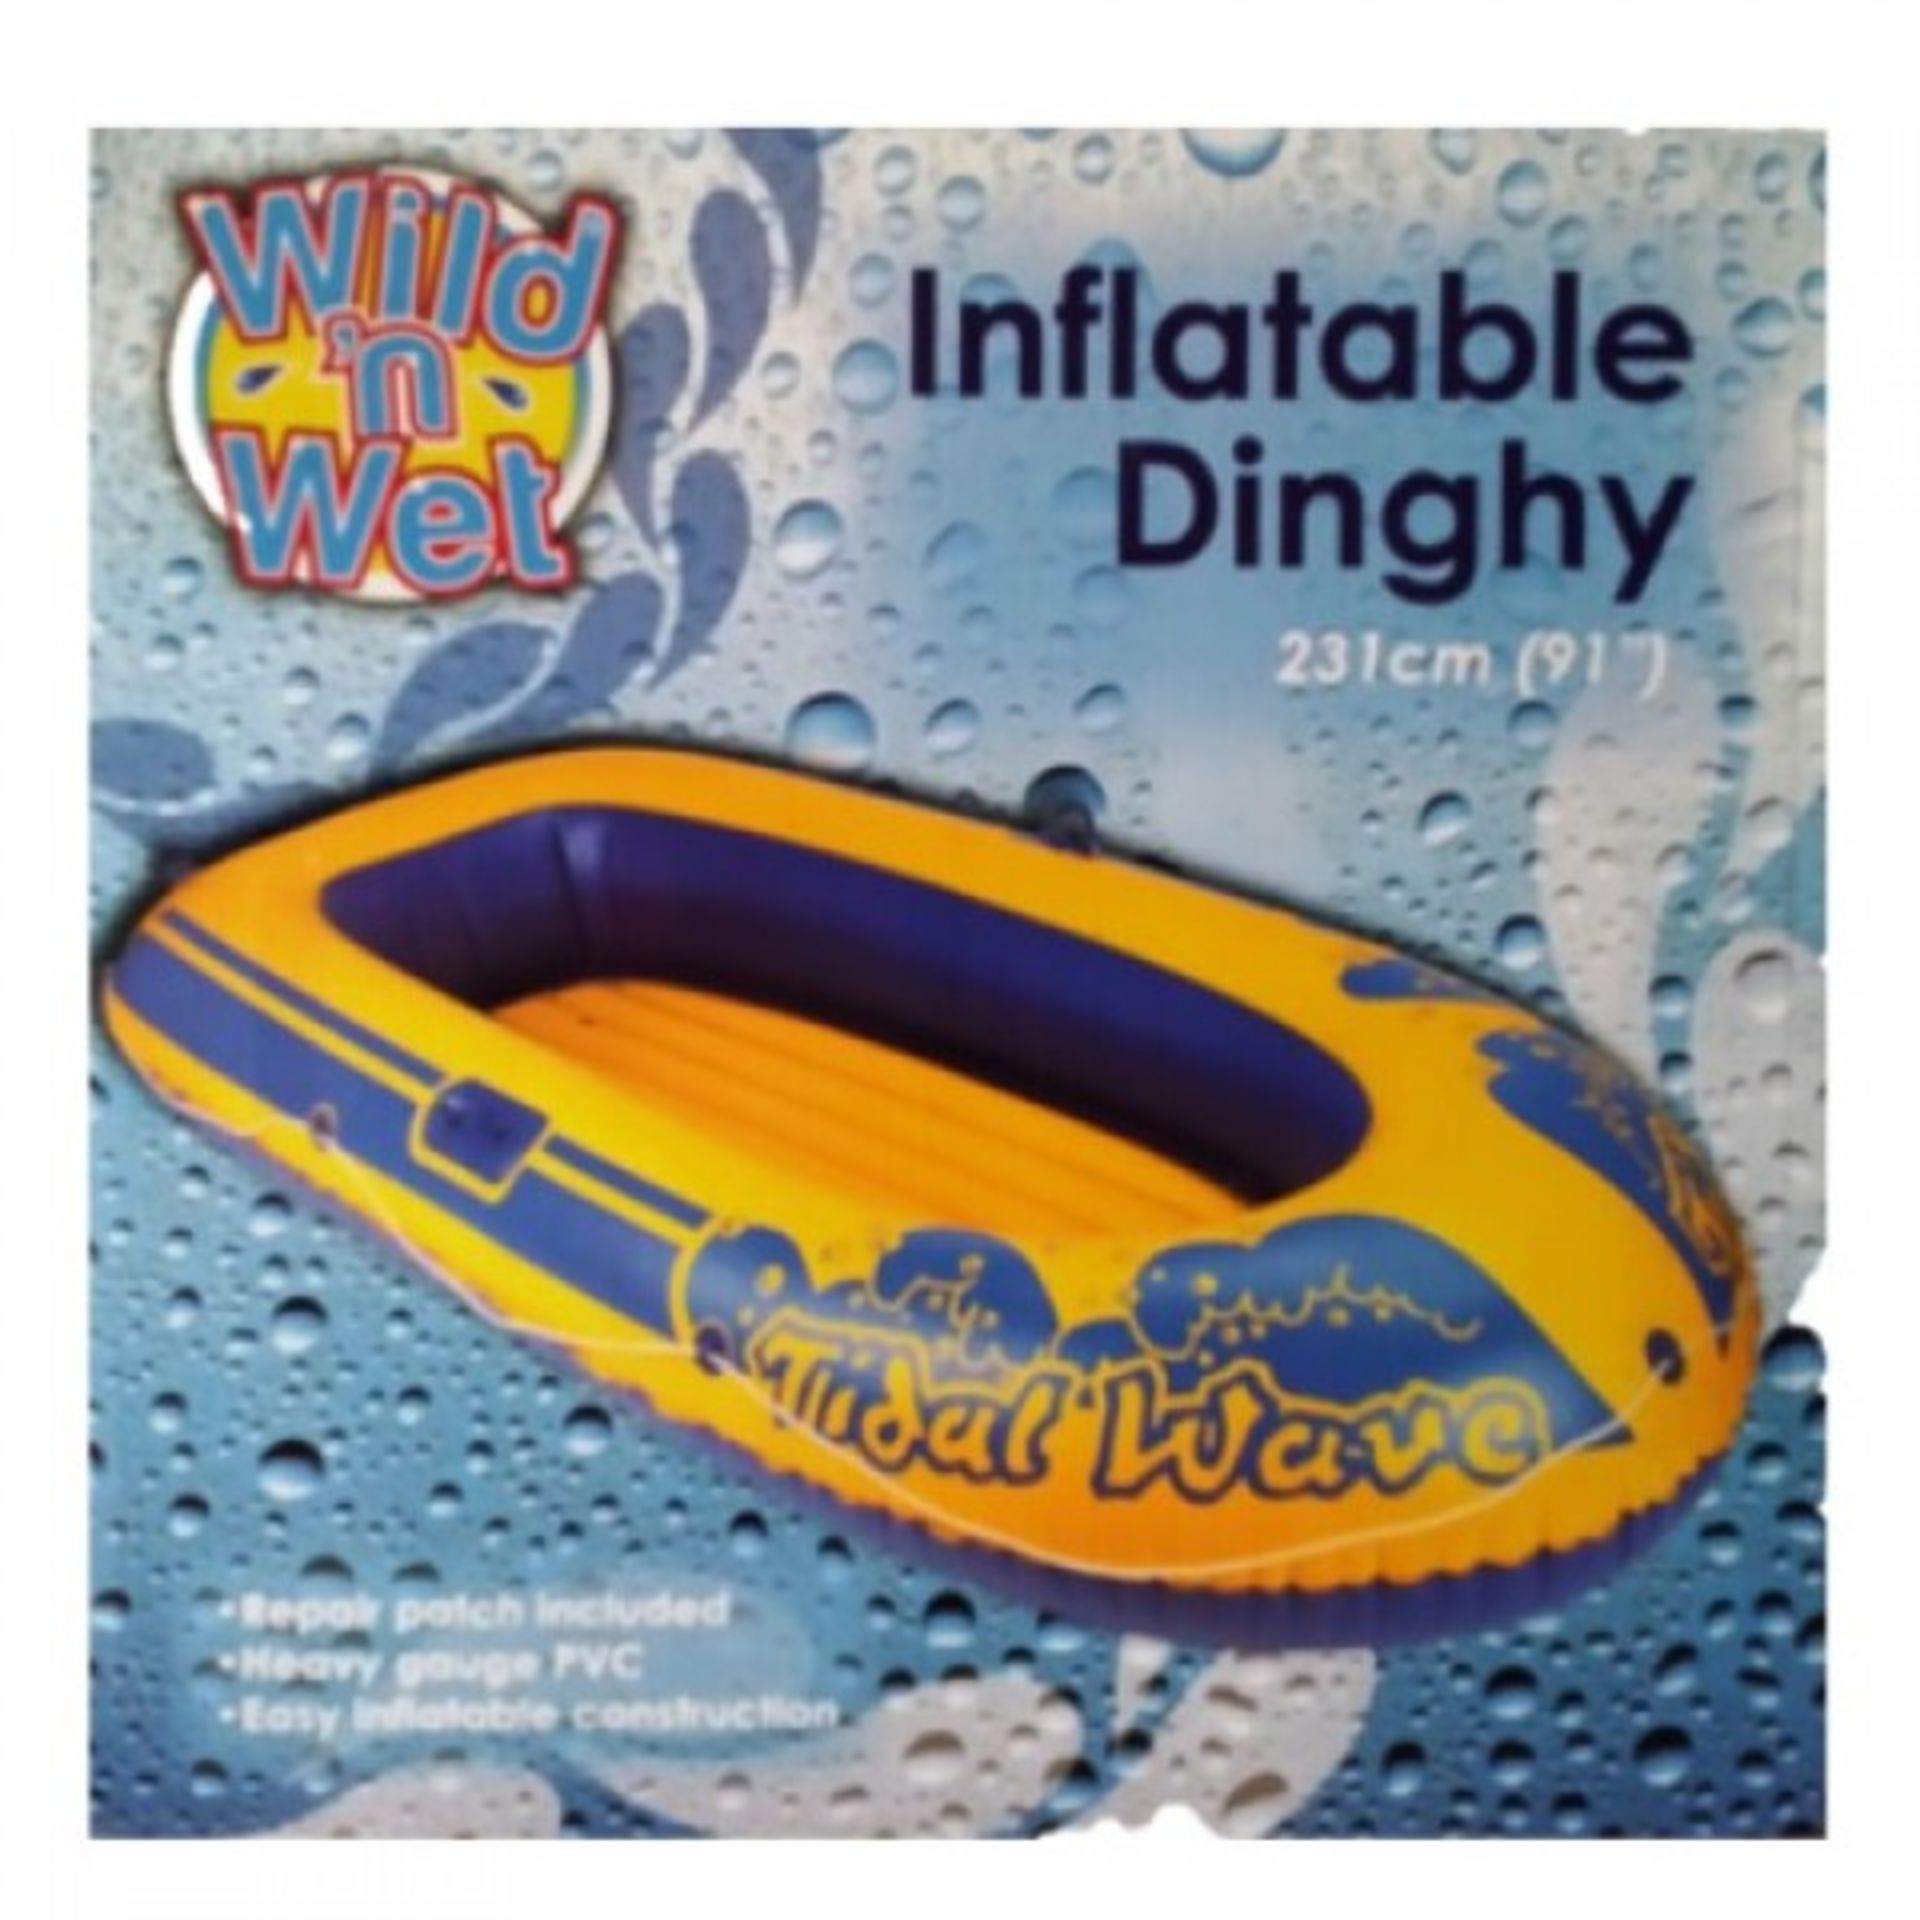 V Brand New 91" (231 cm) 3 Person Inflatable Dinghy Made from Heavy Gauge PVC - Easy Inflate - - Image 2 of 2